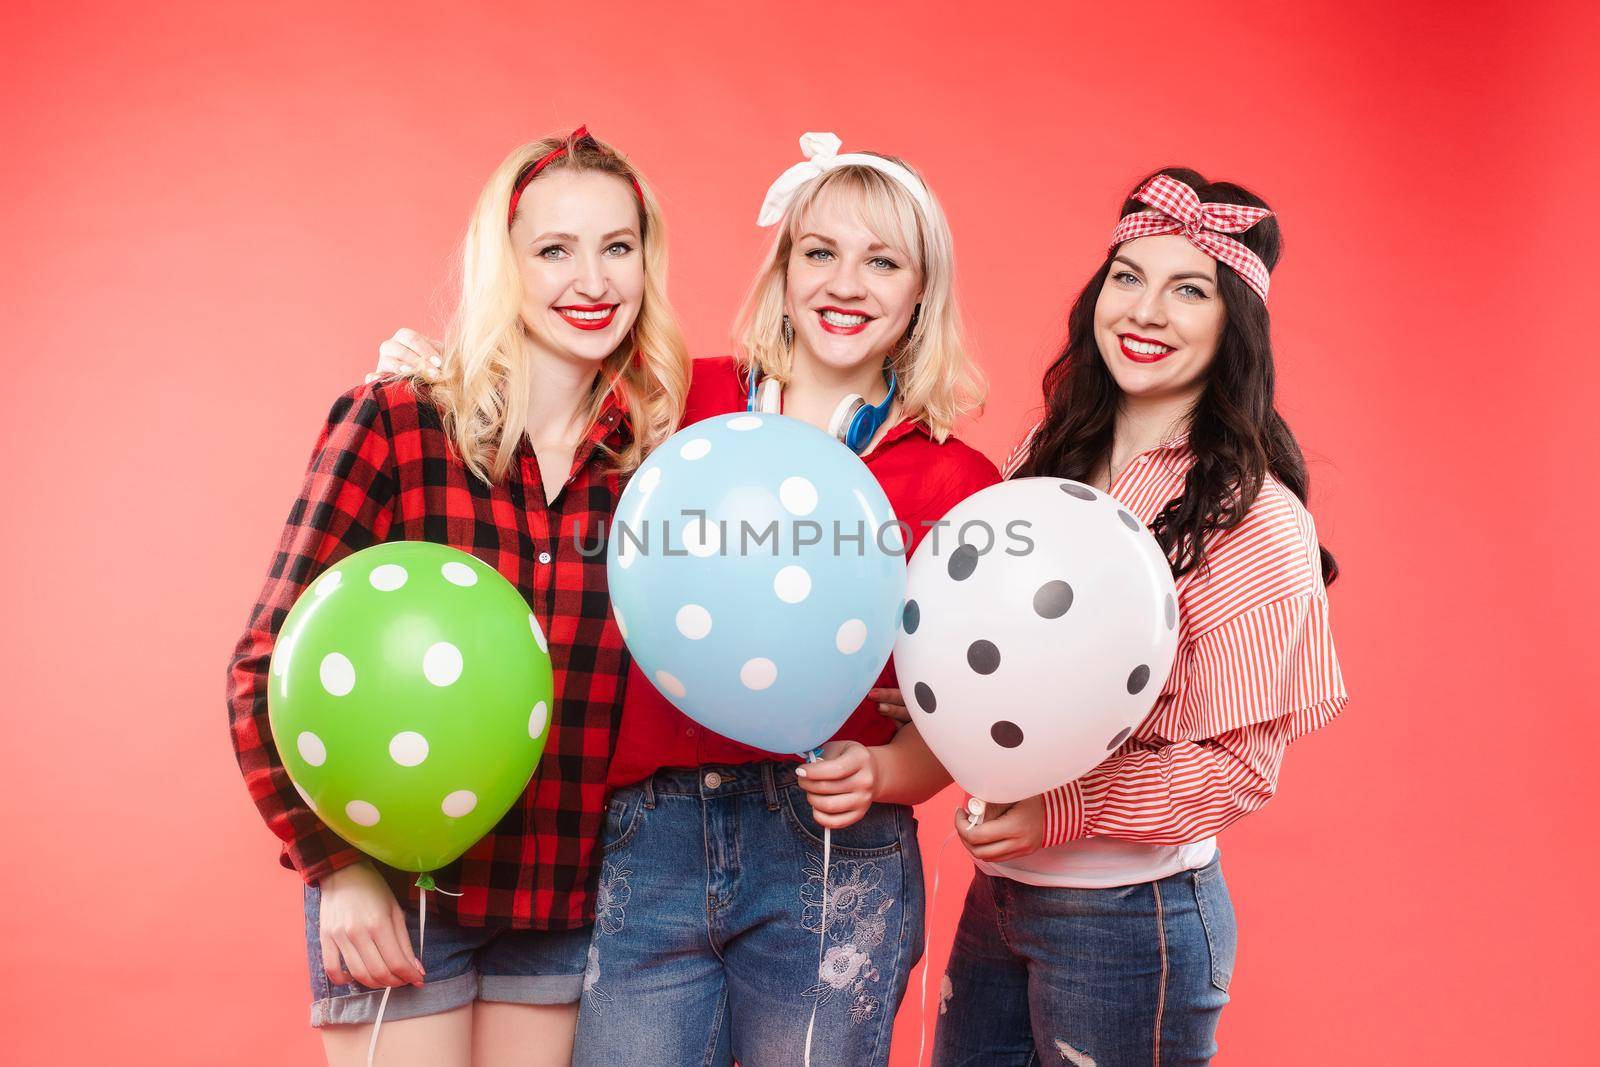 Stock photo of three cheerful beautiful and stylish girls hugging and smiling at camera. They are holding colorful dotted air balloons. Isolate on red background.